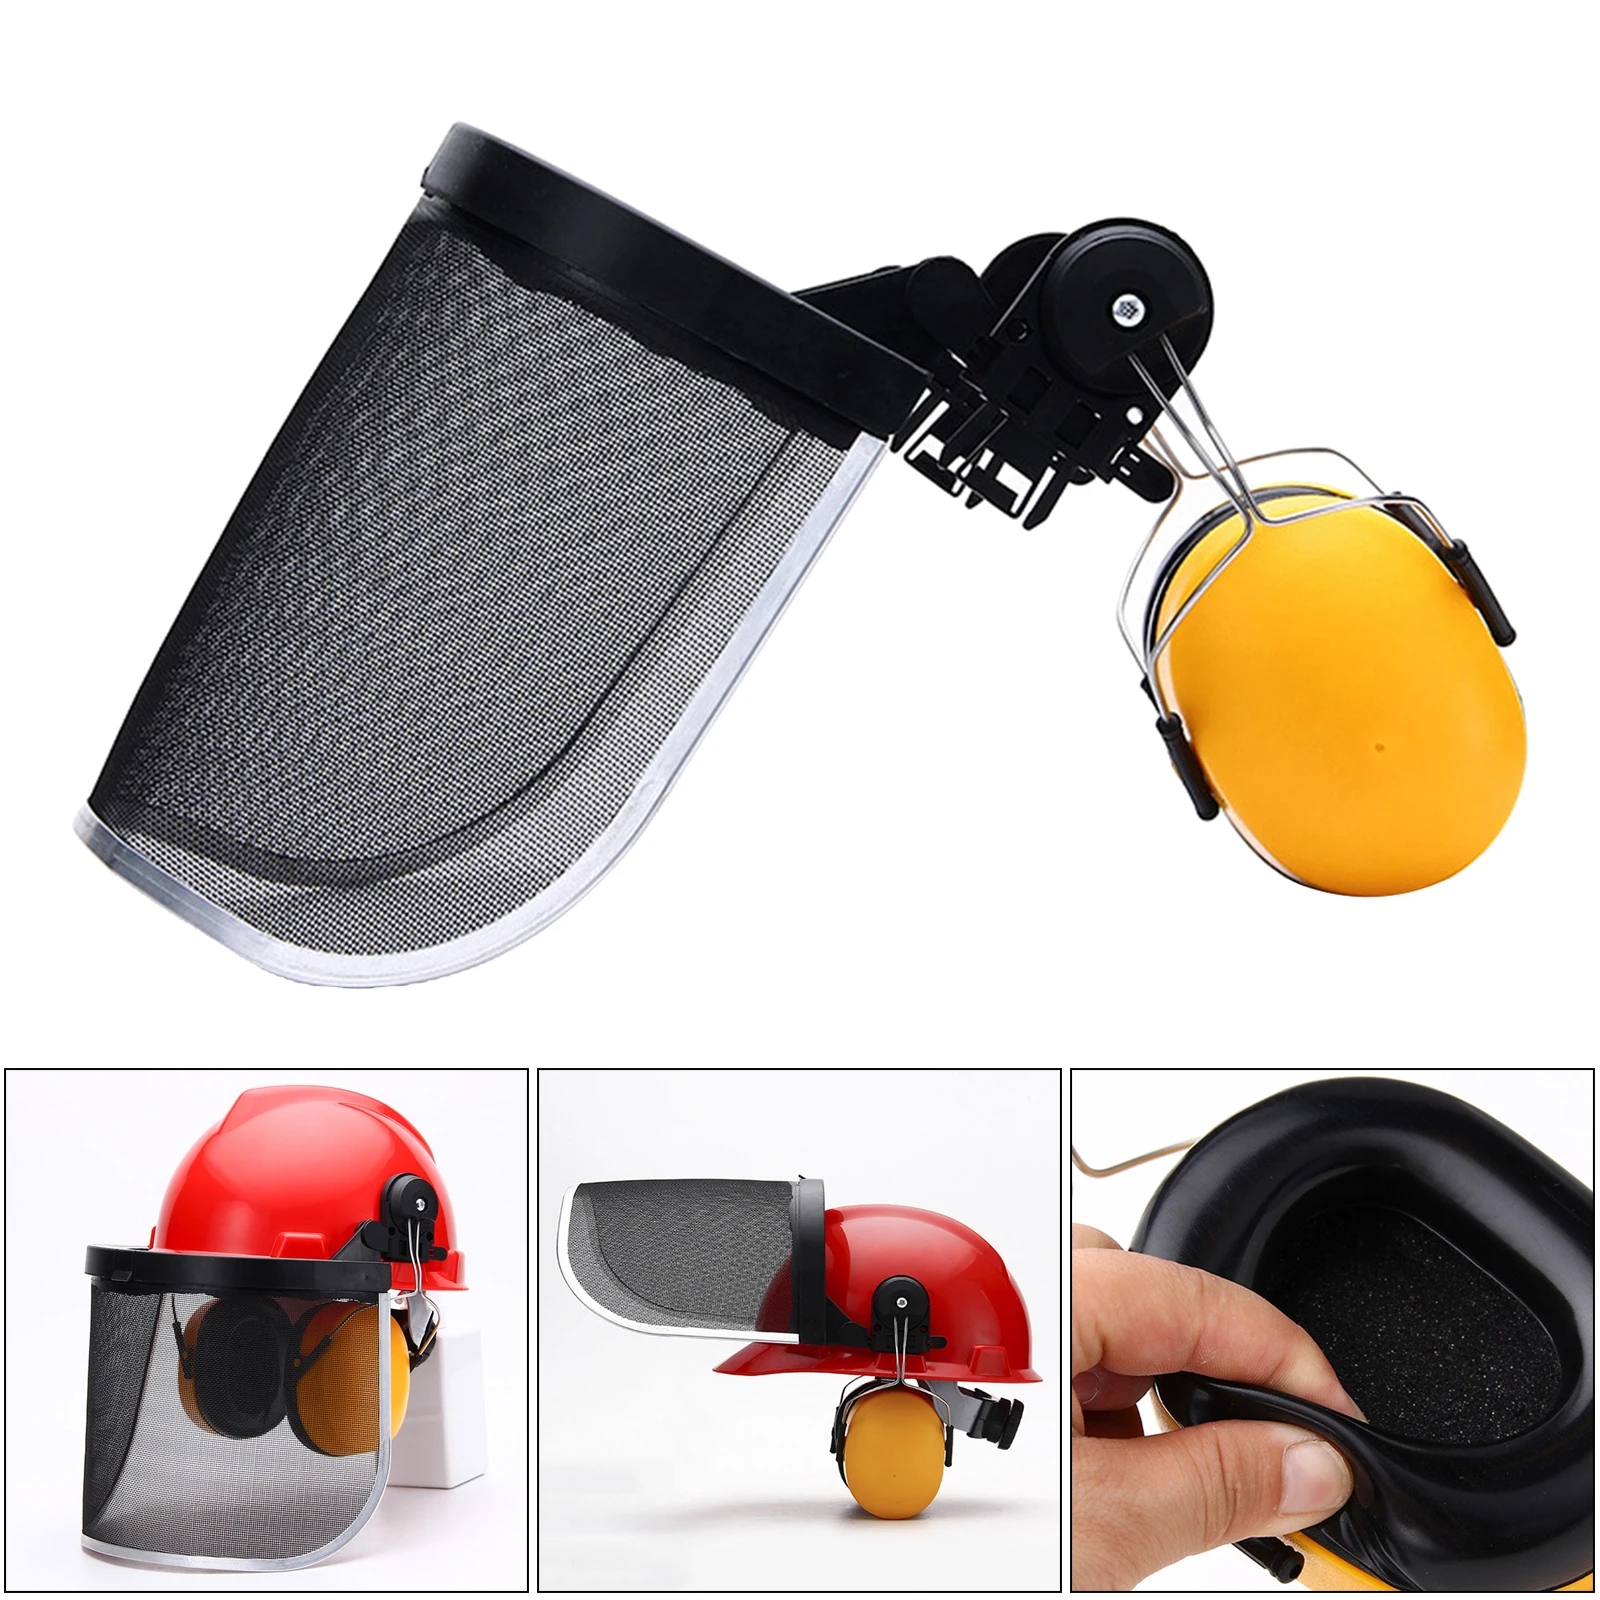 Industrial Forestry Ear Muffs and Protective Visors for Safety Helmet, Wire Mesh Mask Heavy Duty Hard Hat Chainsaw Helmet Parts